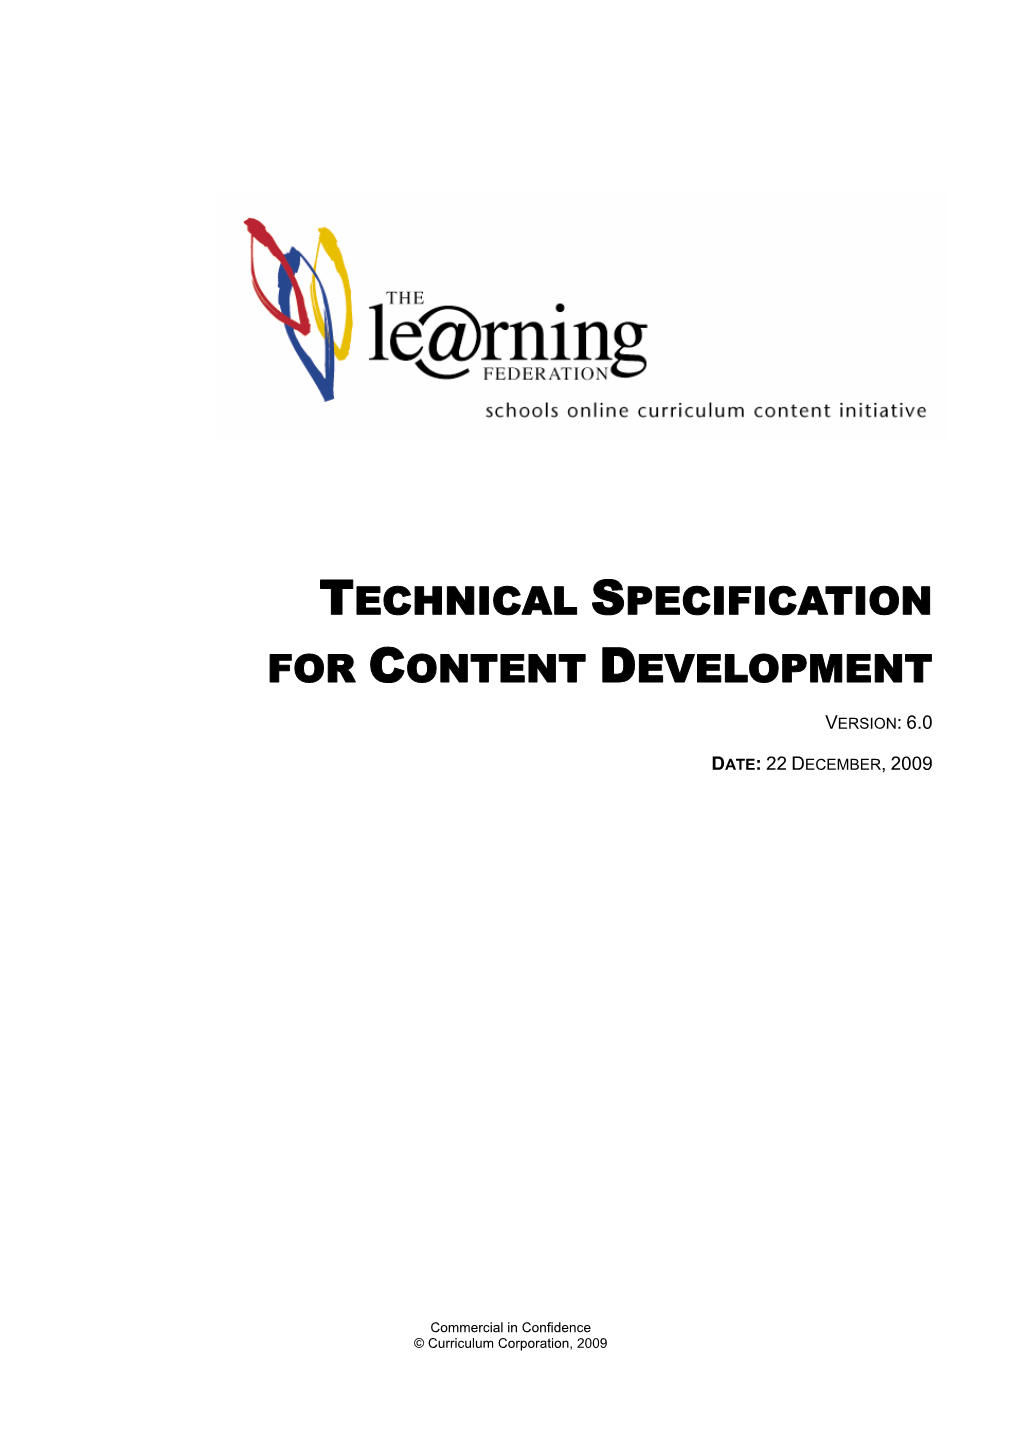 The Technical Specification for Content Development Is for General Information Purposes Only